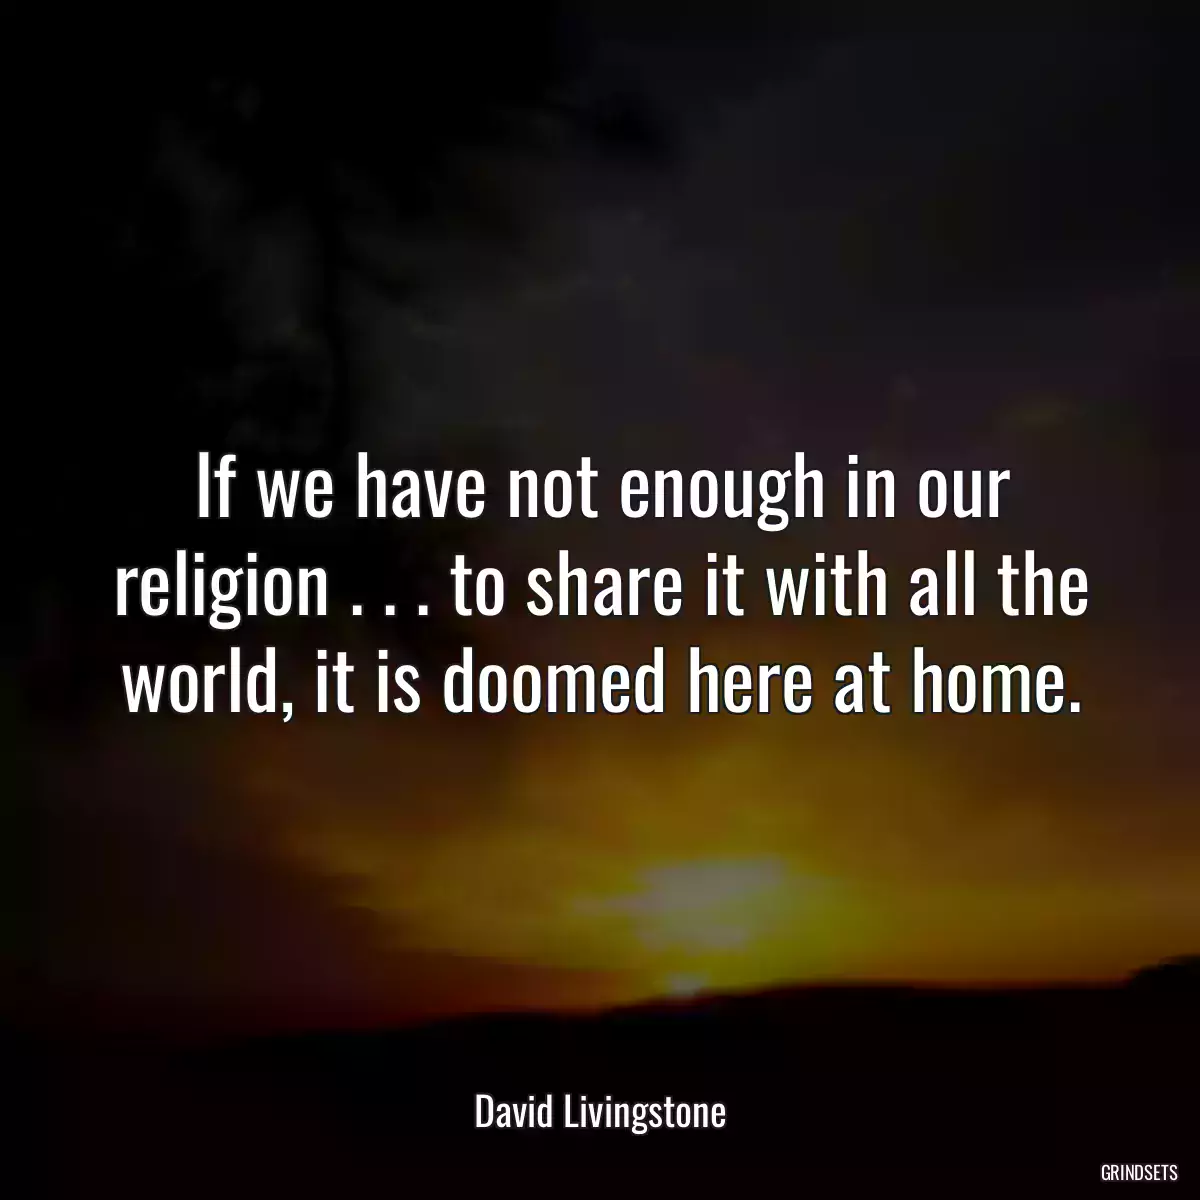 If we have not enough in our religion . . . to share it with all the world, it is doomed here at home.